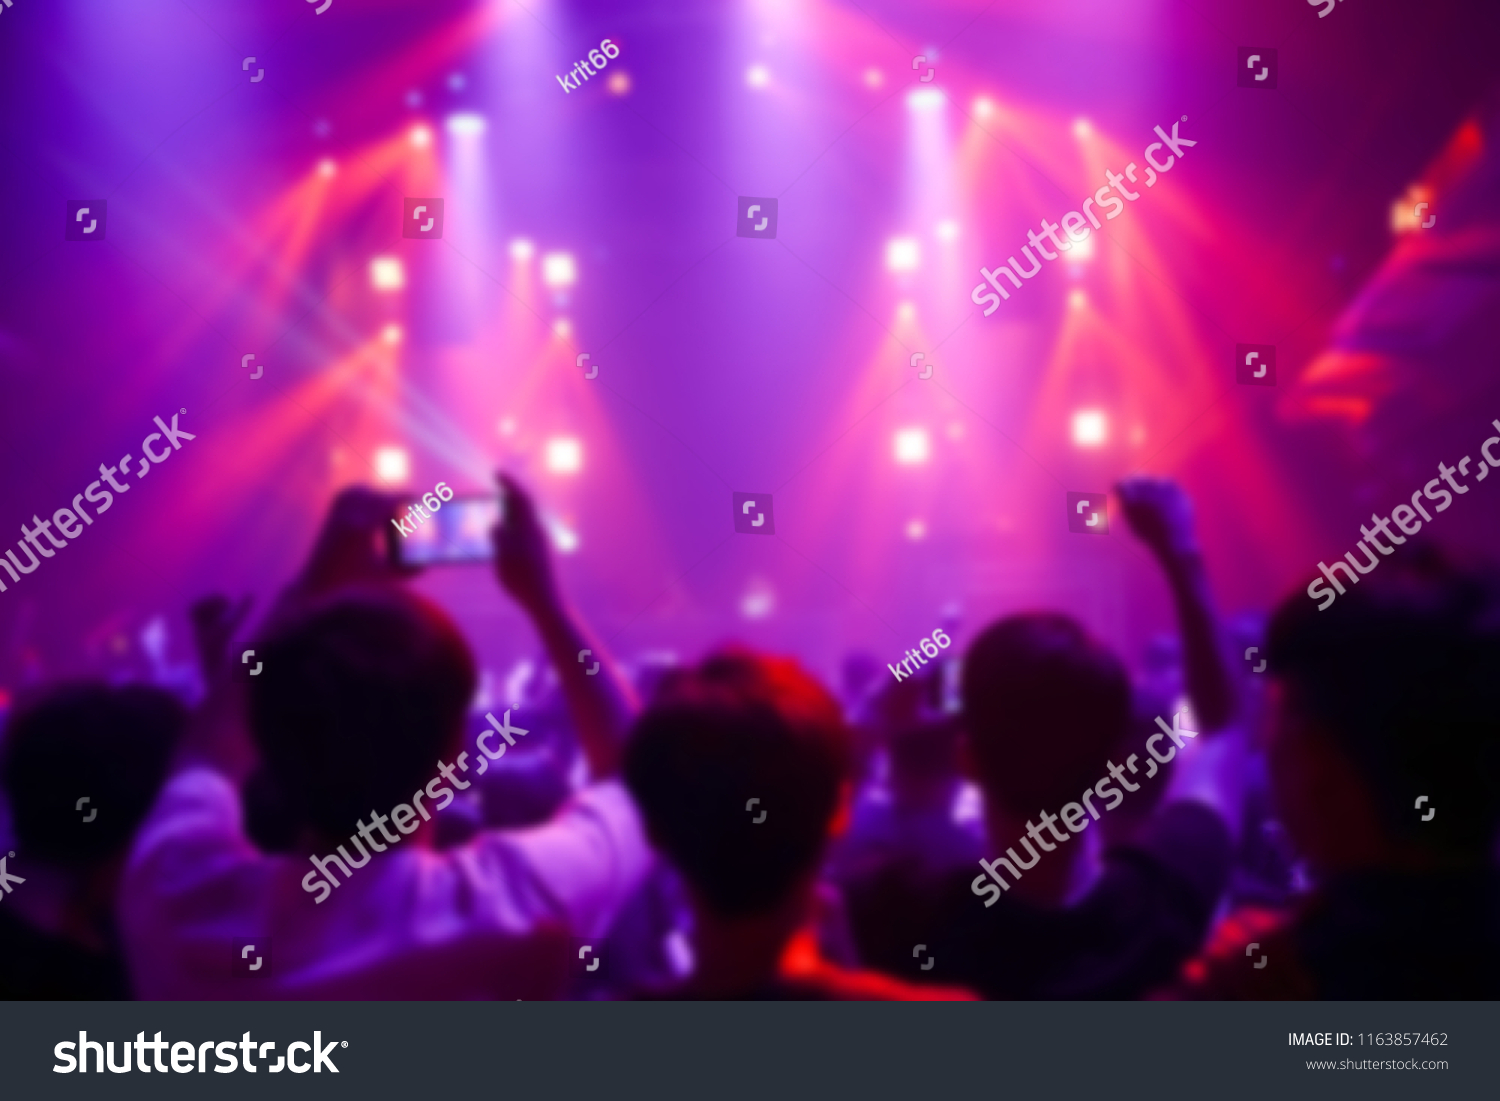 Effects blur Concert, disco dj party. People with hands up having fun #1163857462